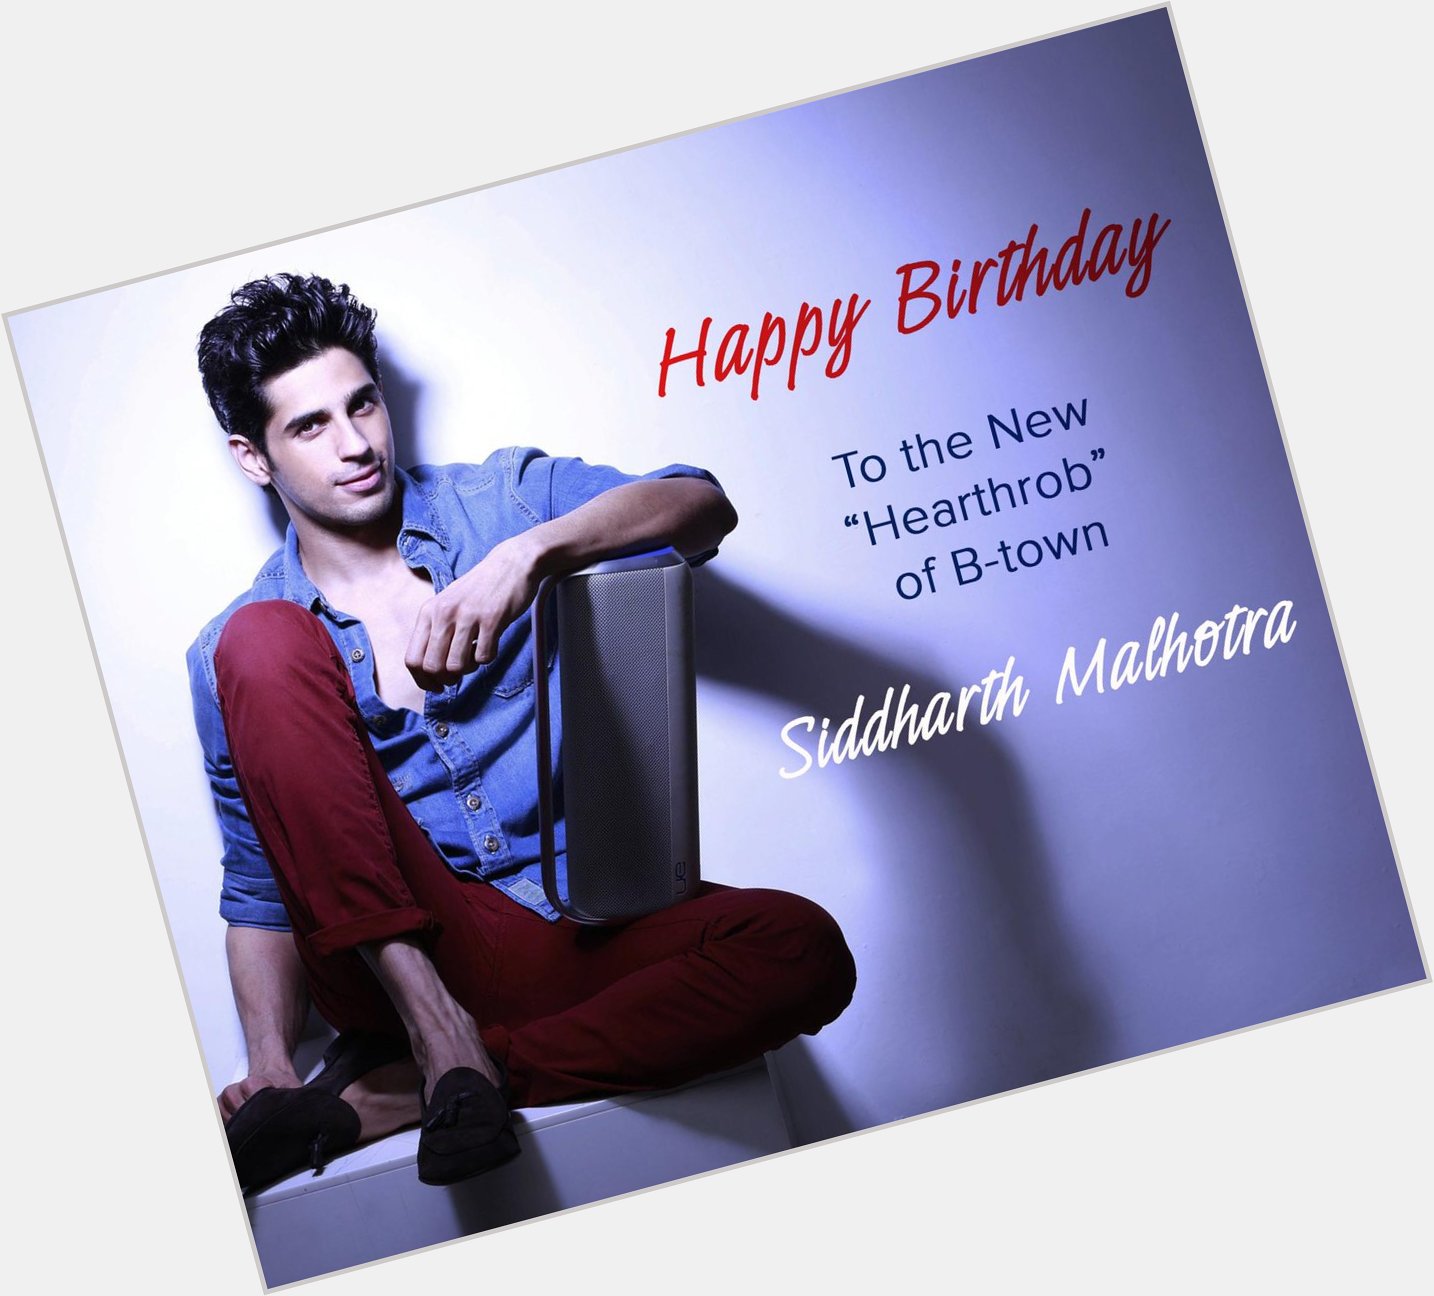 Happy Birthday Siddharth Malhotra. 
Its your day to be a Bad \"Student\" and Break all the Rules! 